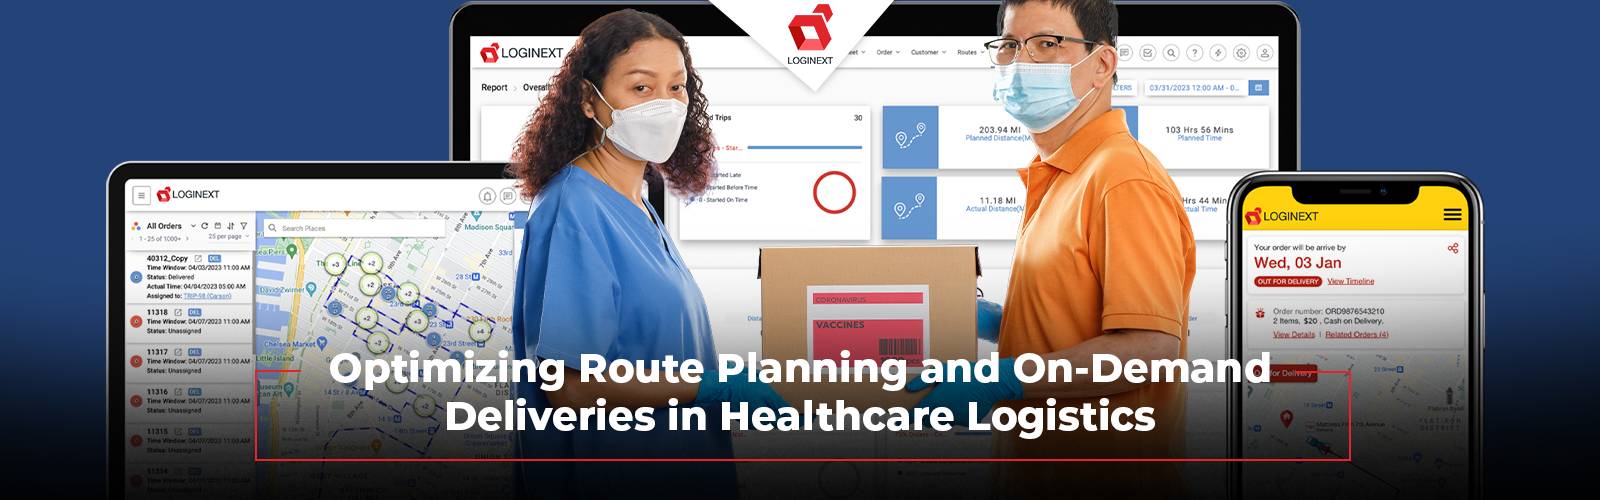 Optimizing Route Planning and On-Demand Deliveries in Healthcare Logistics